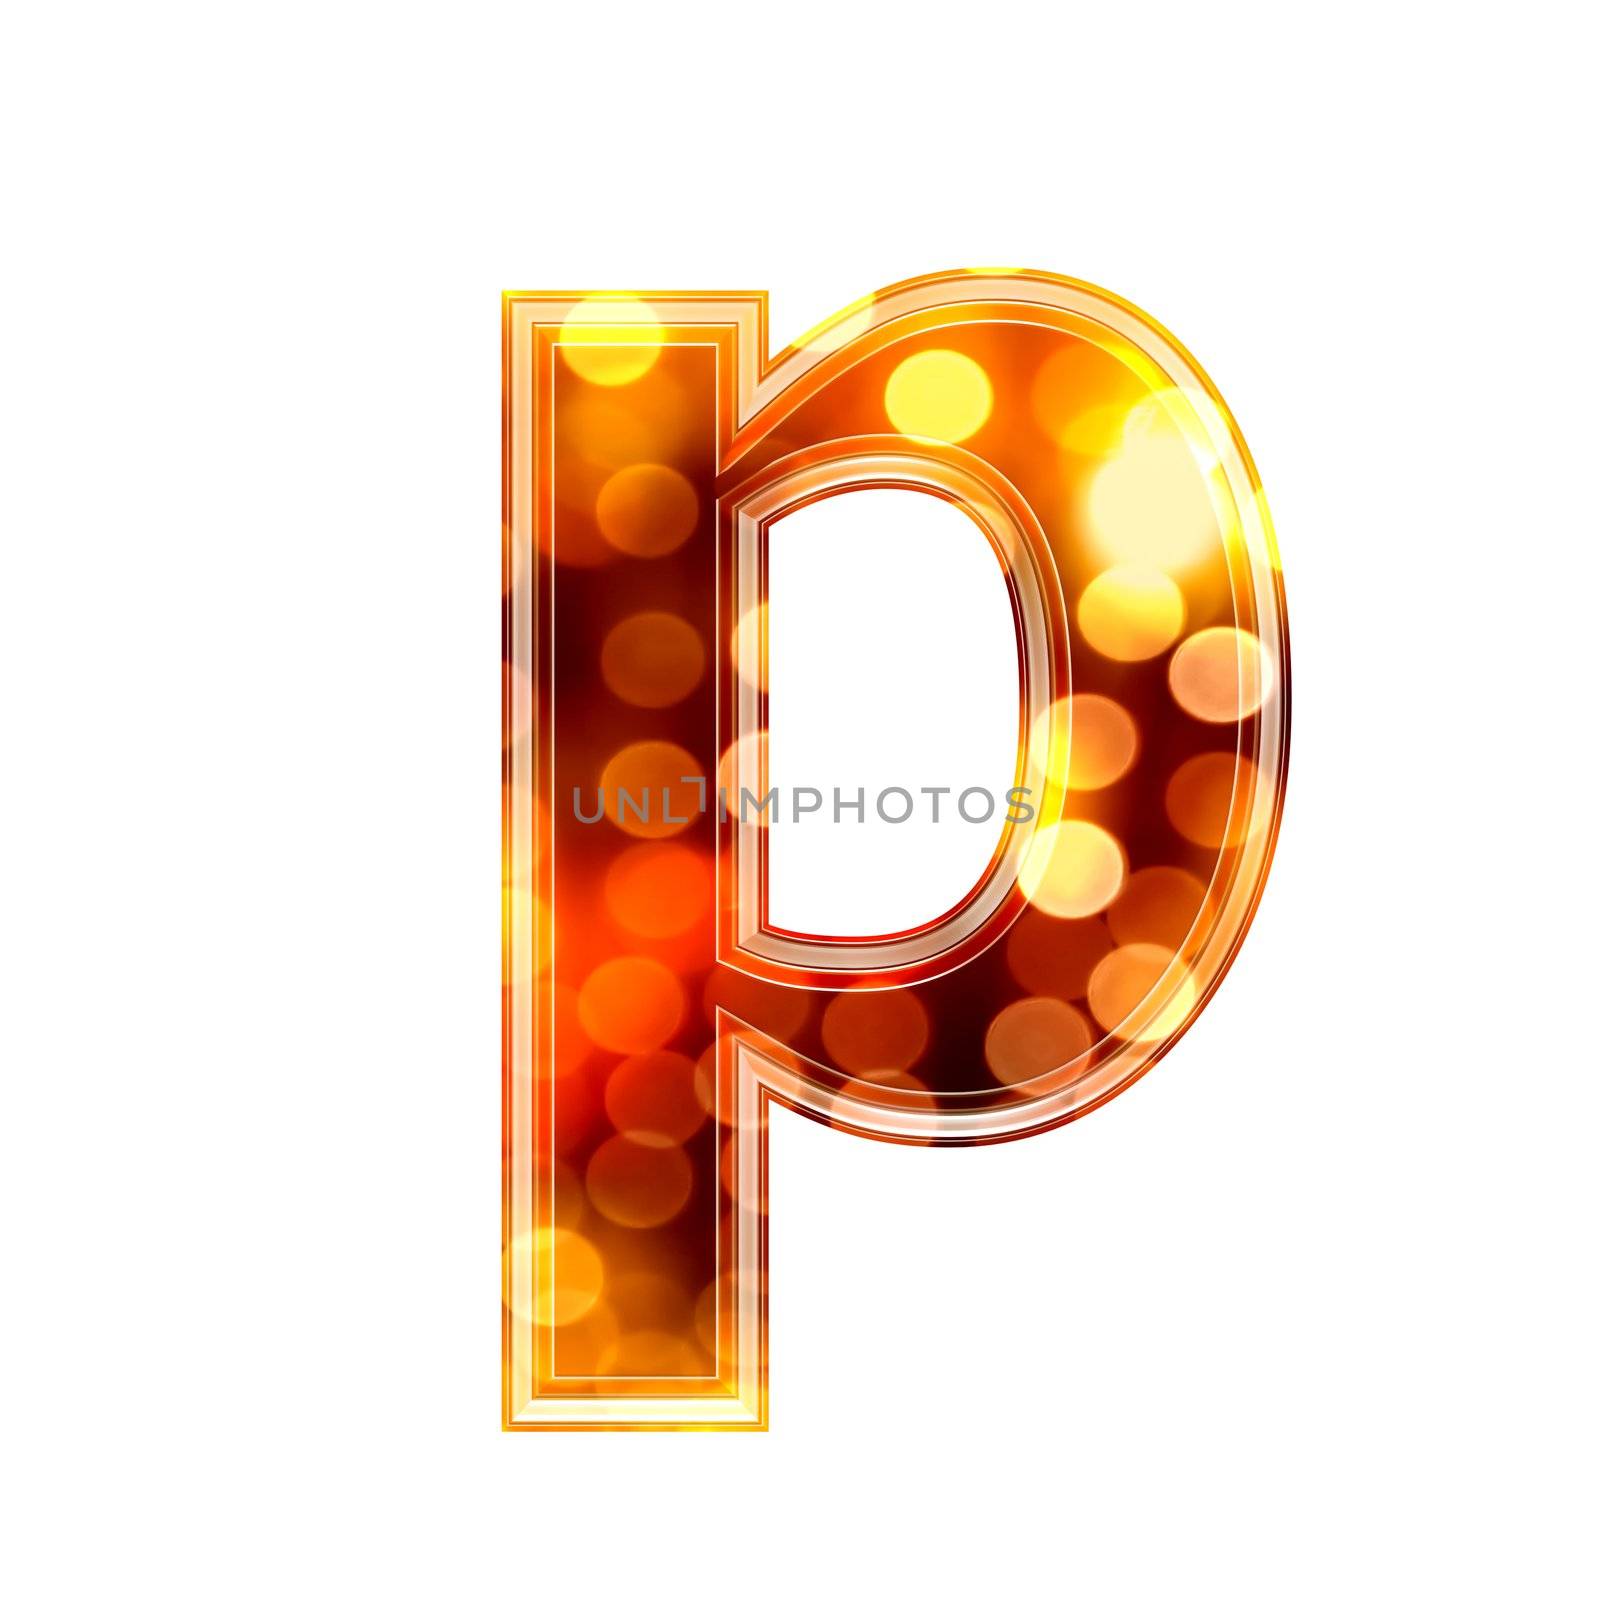 3d letter with glowing lights texture - p by chrisroll